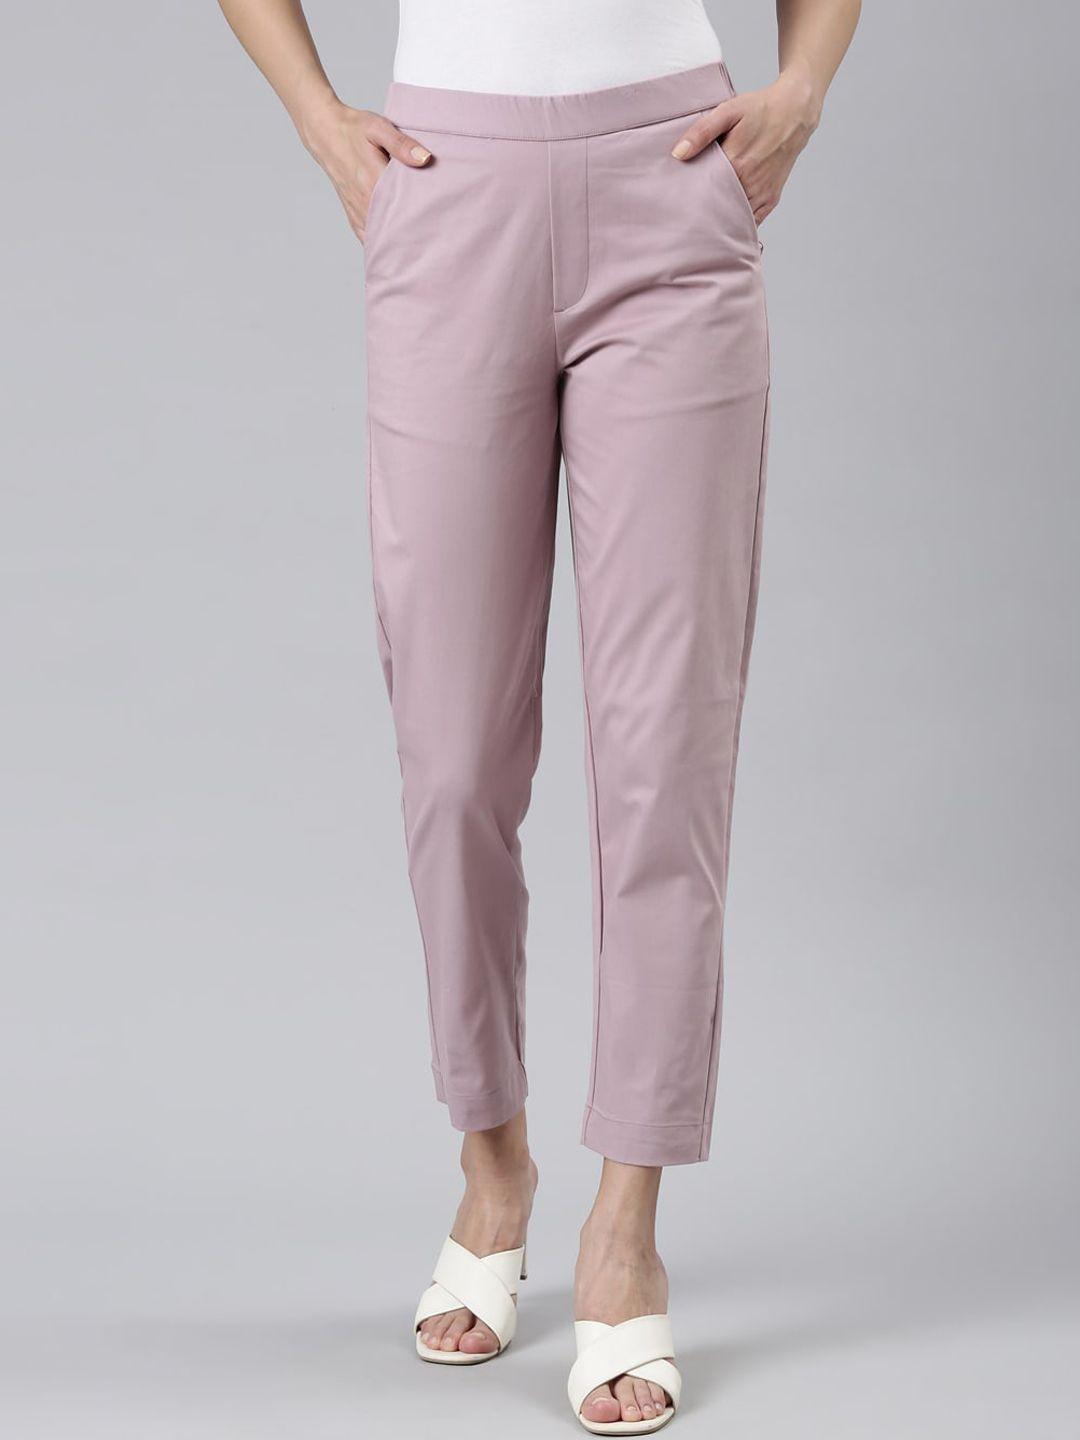 go-colors-women-smart-straight-fit-chinos-cotton-trousers